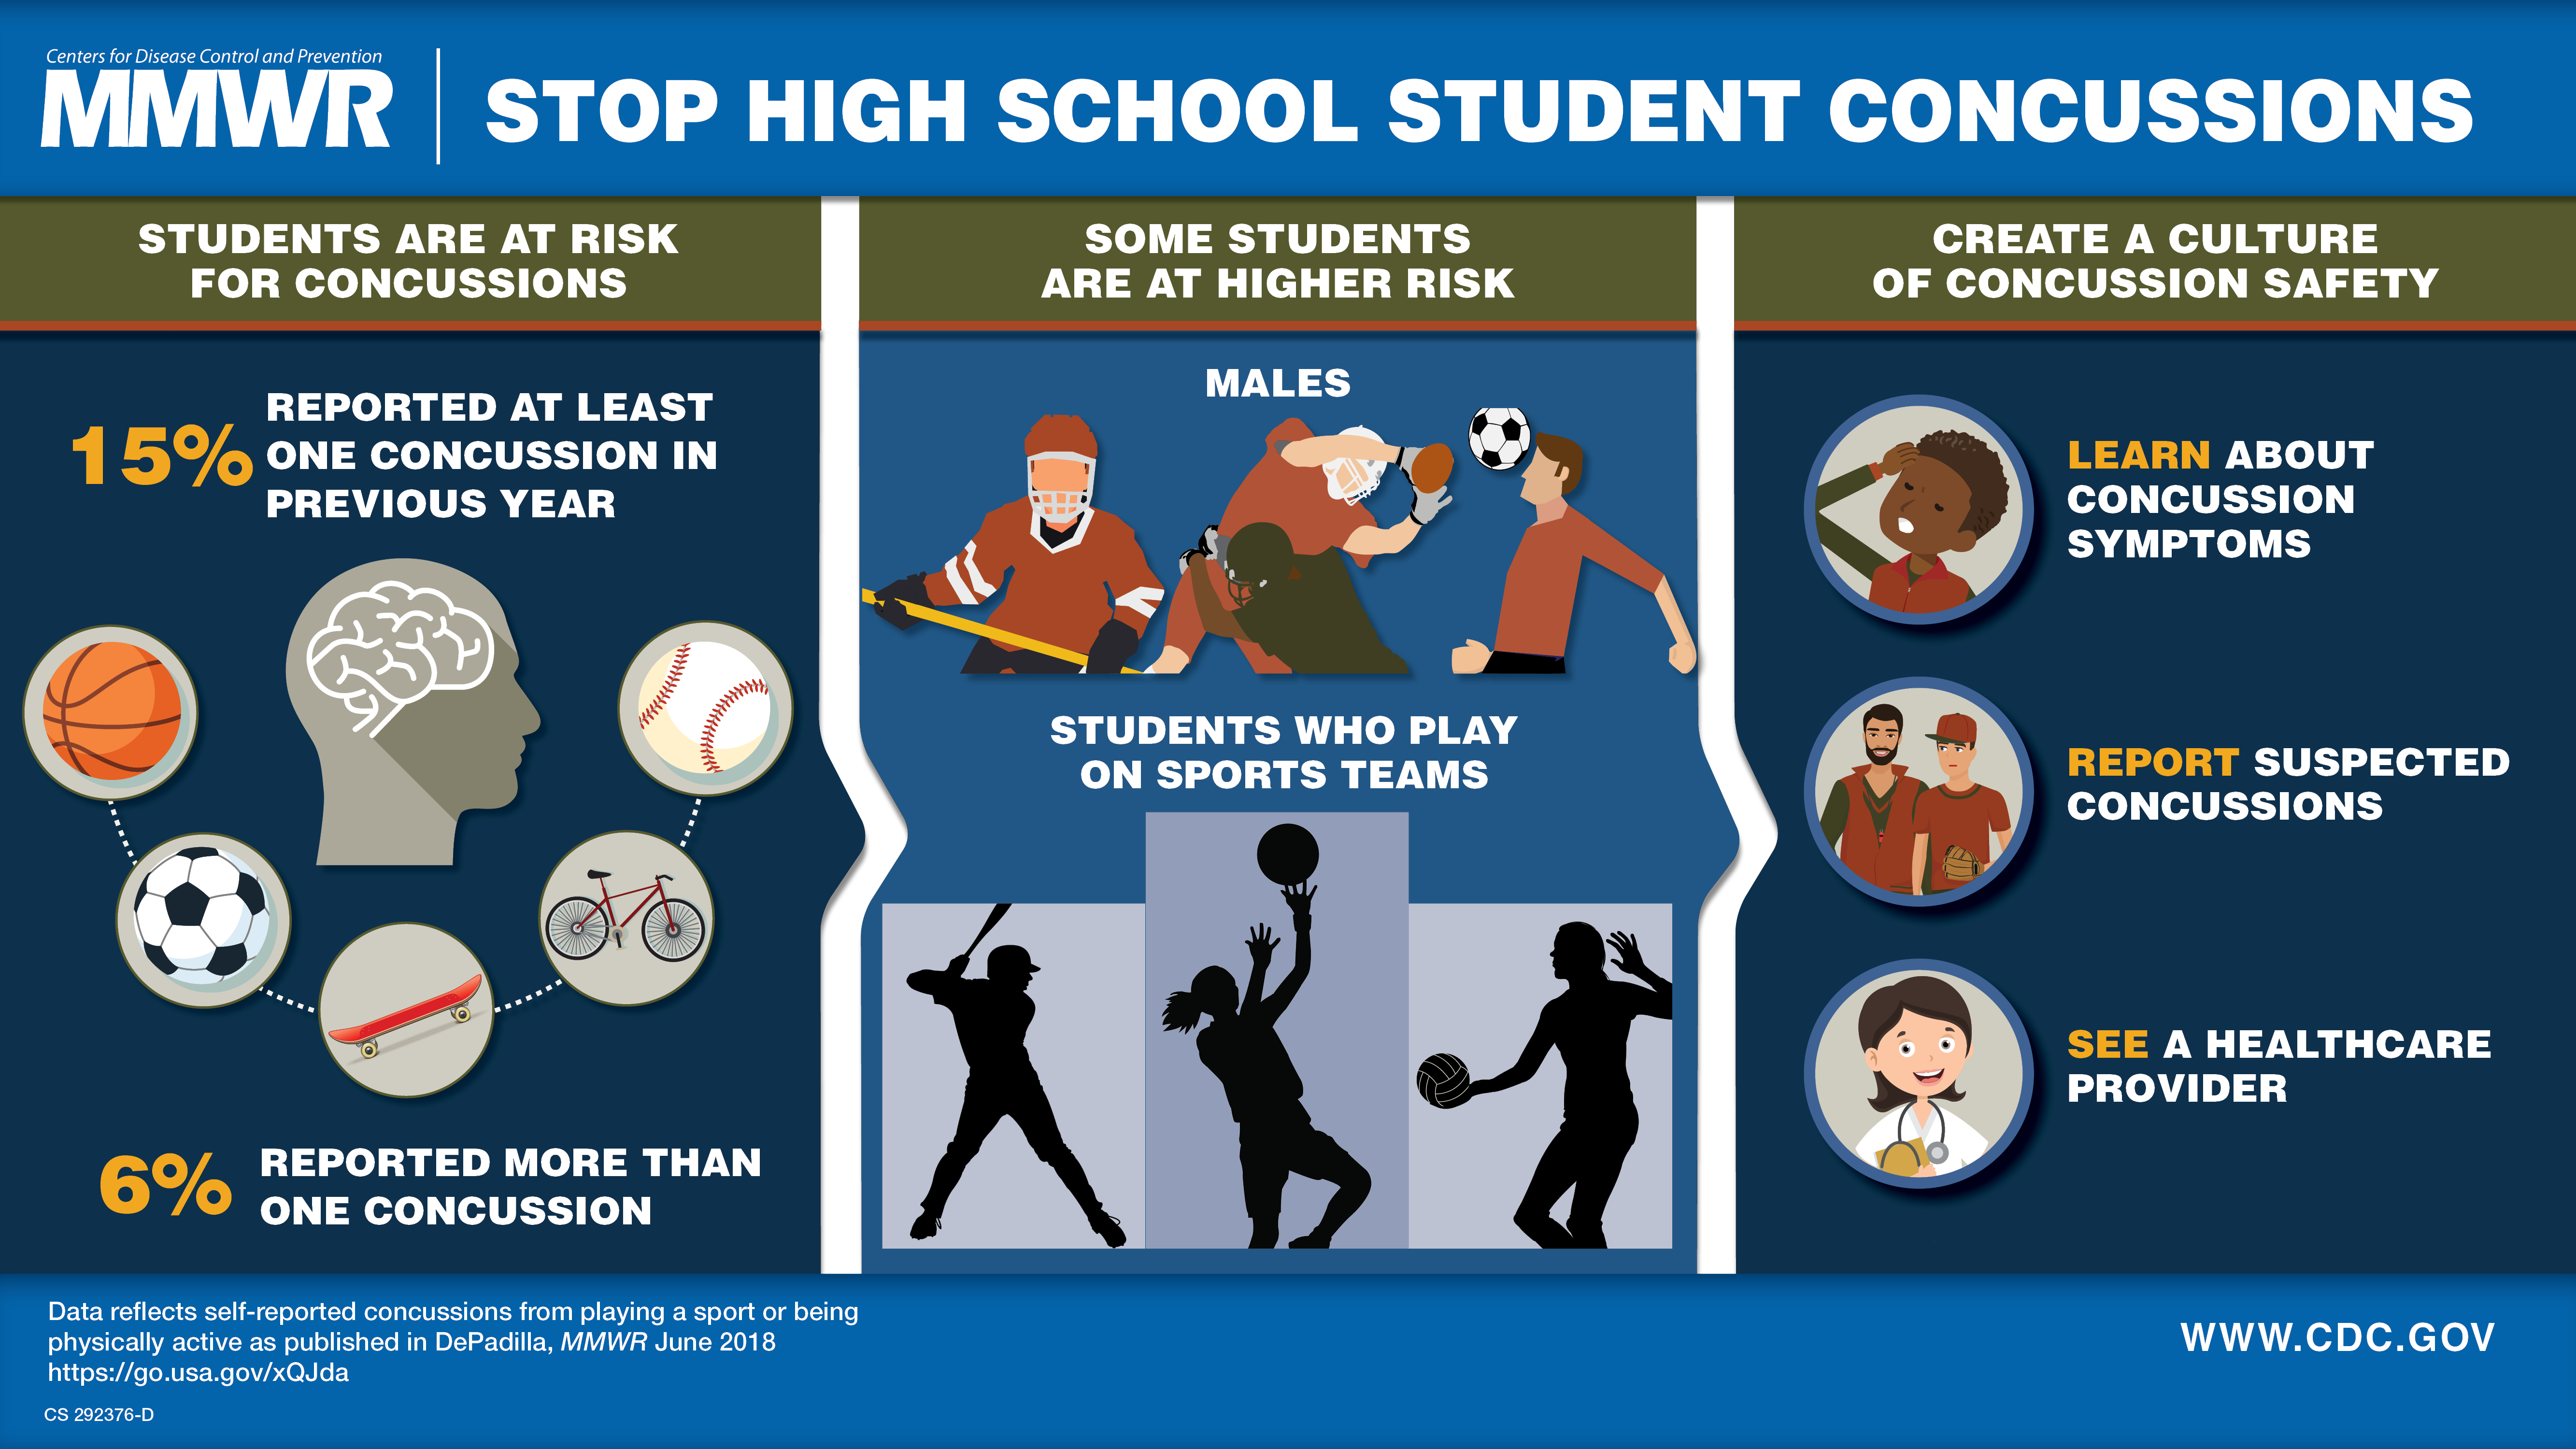 Students on sports teams at higher risk for concussion